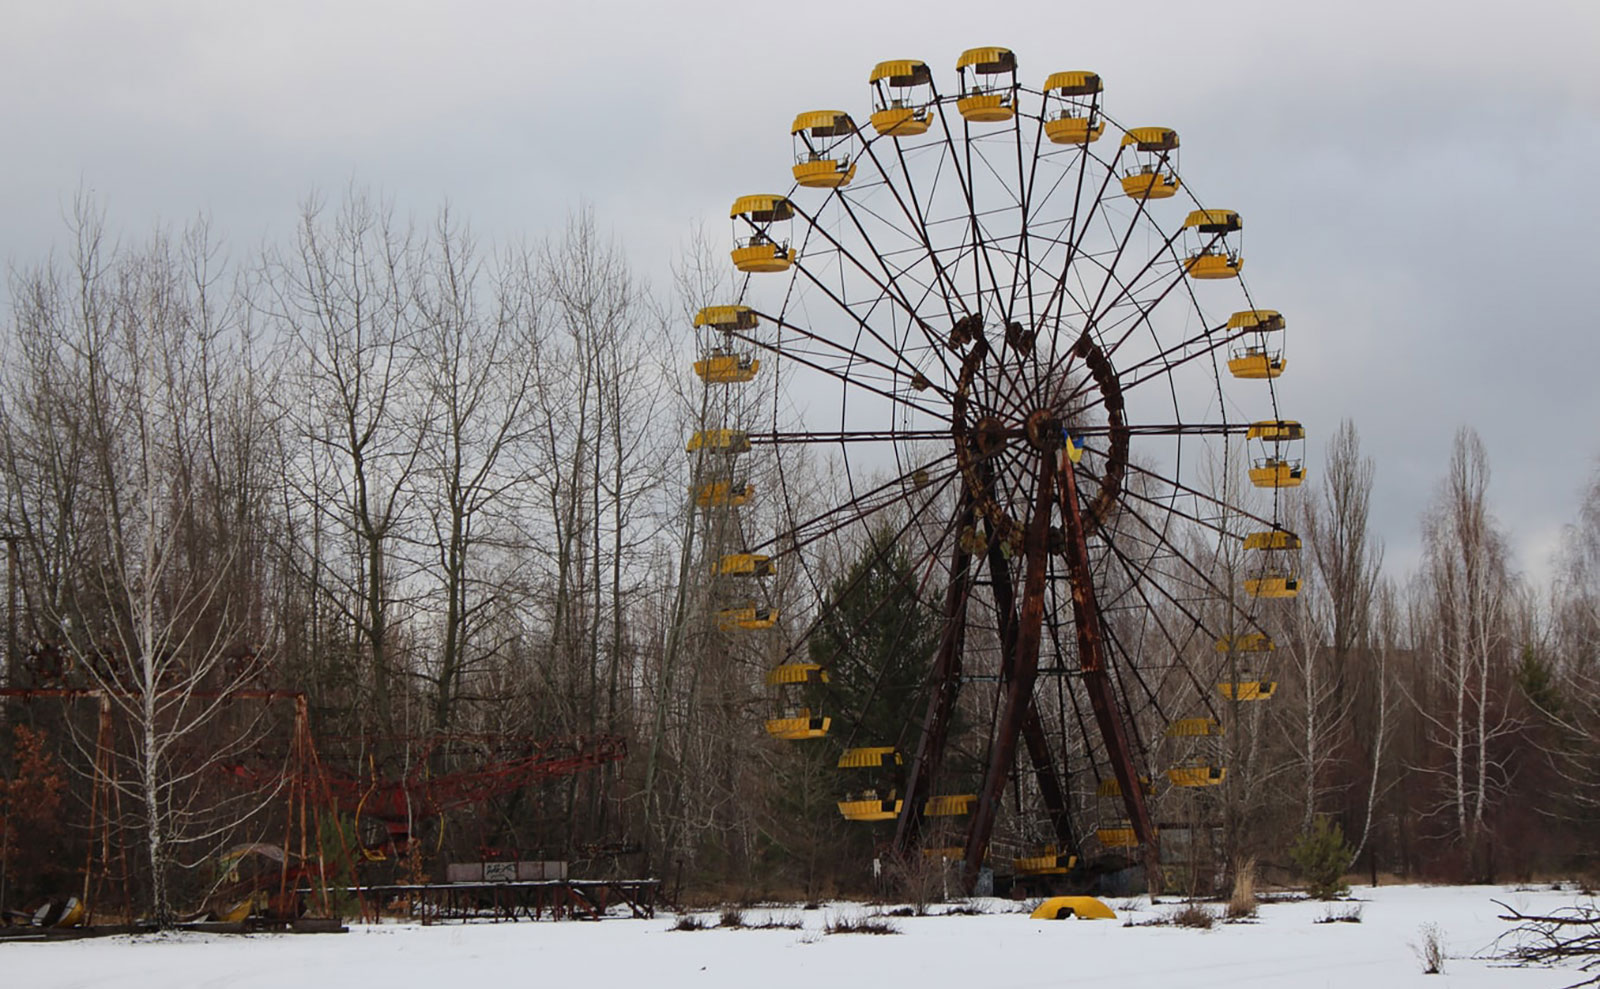 Chernobyl abandoned ferris wheel in Chernobyl exclusion zone